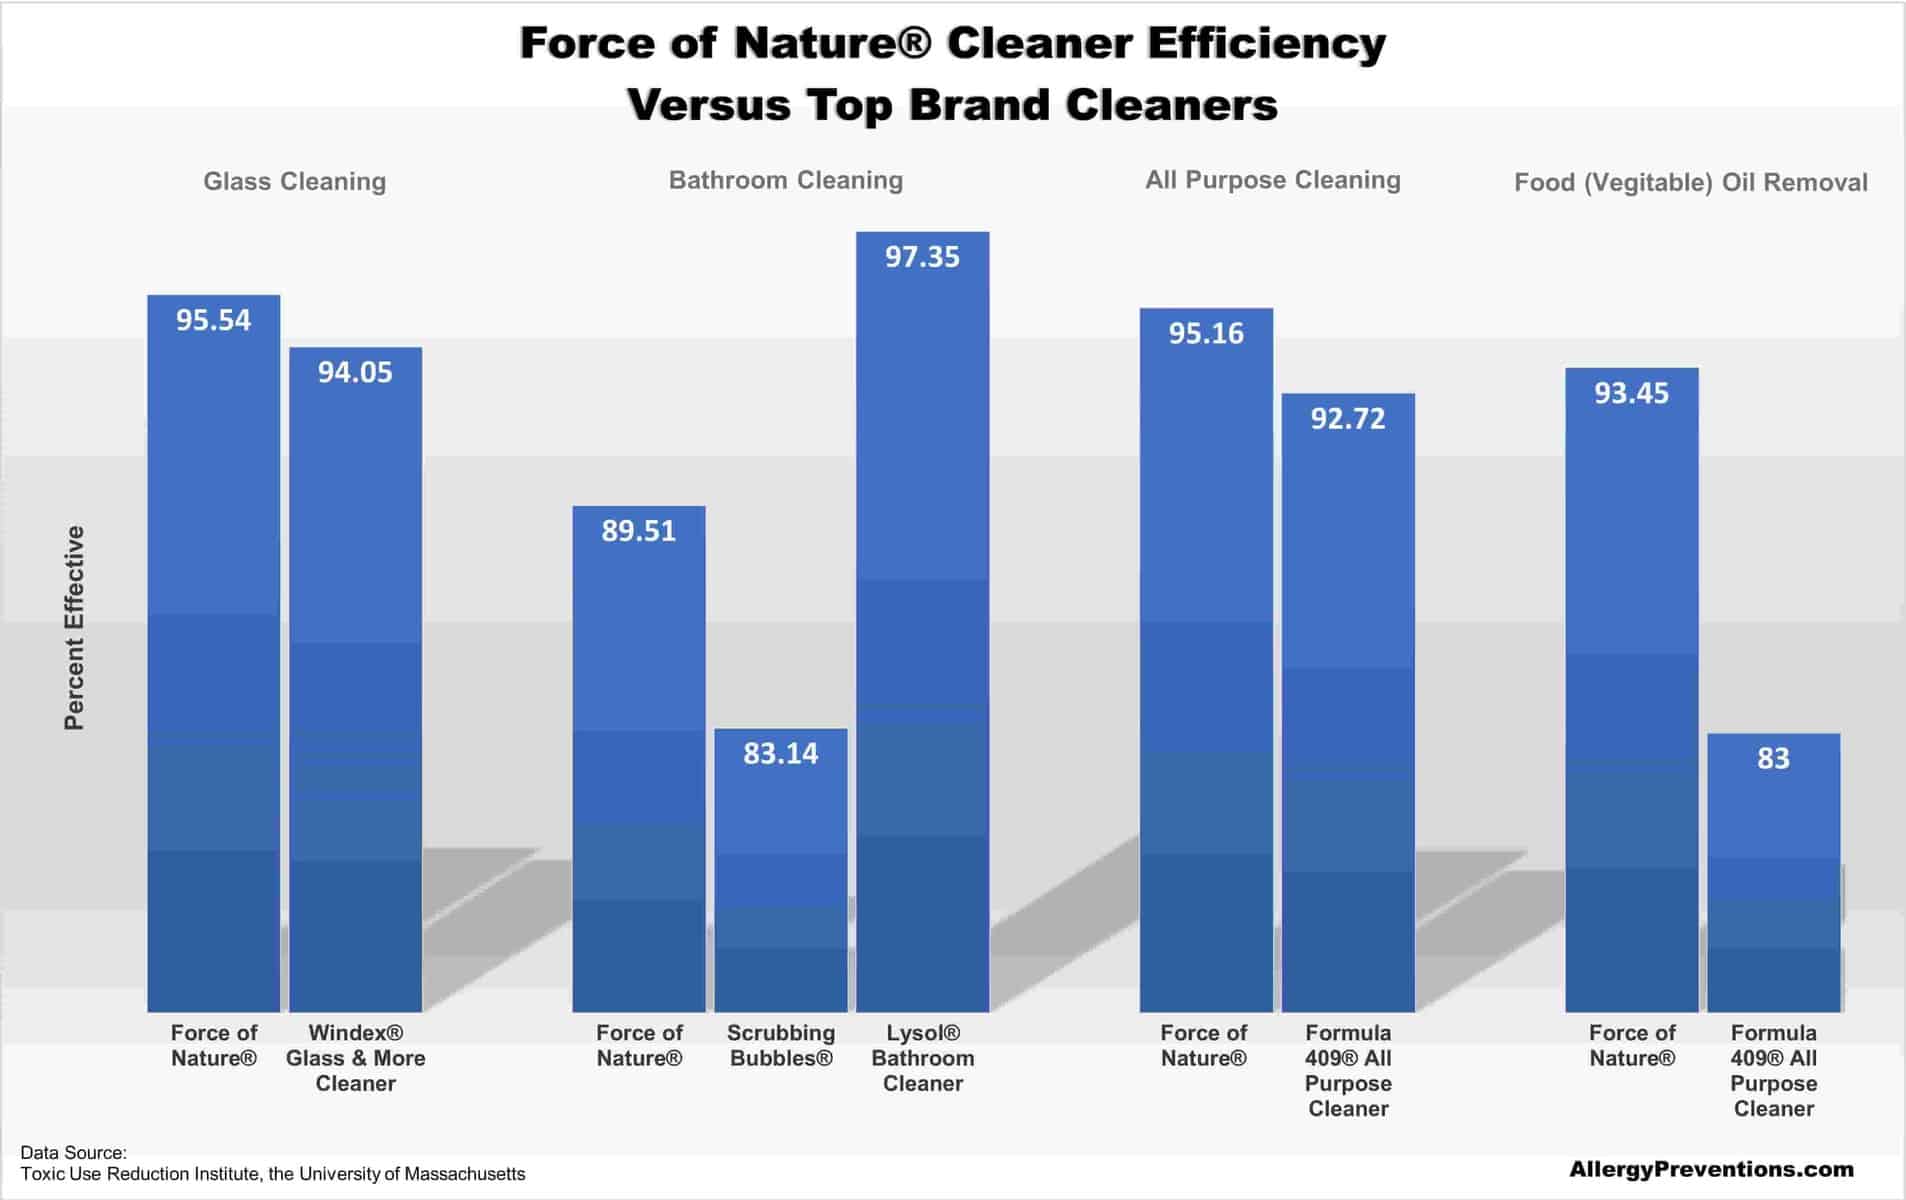 Force-of-Nature-Efficiency-Chart-allergy-preventions